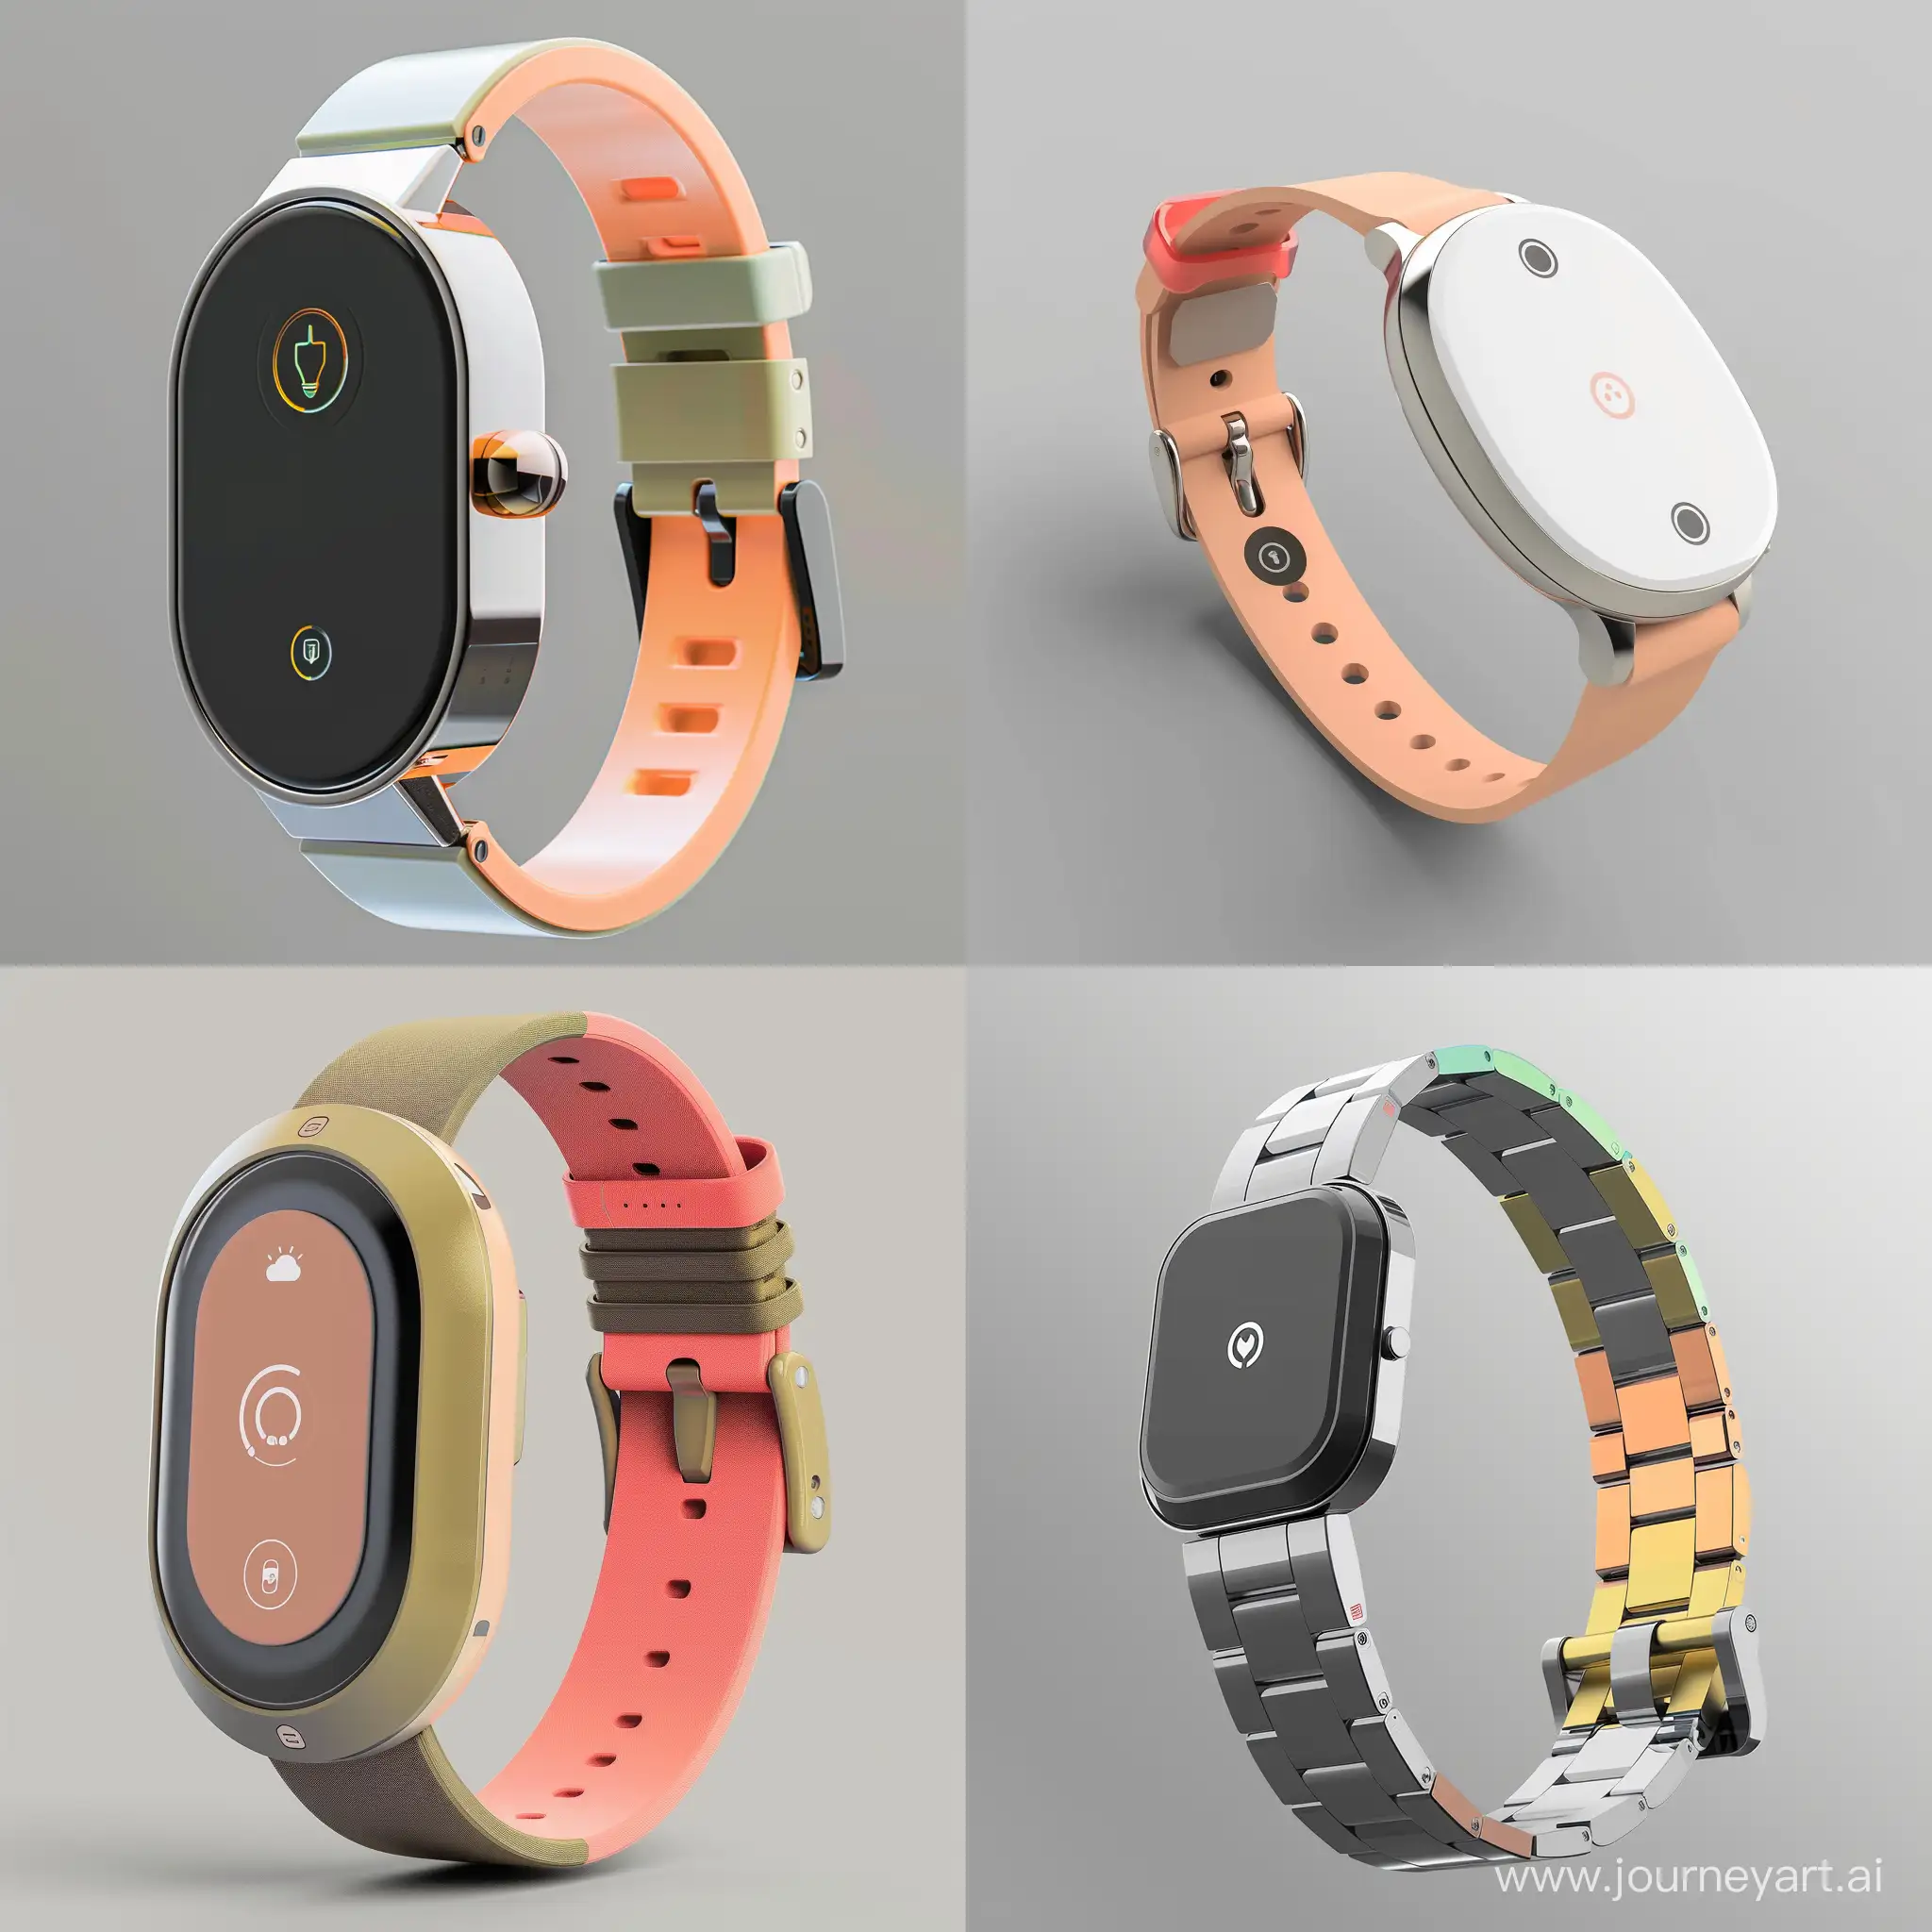 "Picture a stylish, wrist-worn energy management device that combines the functionality of AI with the personal touch of wearable technology. The design resembles a high-end smartwatch with an oval face, made from recycled aluminum, and an eco-friendly band available in multiple colors. Include a discreet logo on the watch face and clasp, and an OLED screen that adjusts to ambient light. The wearable should symbolize personal energy management, offering real-time insights and control over smart home devices."photorealistic product design style